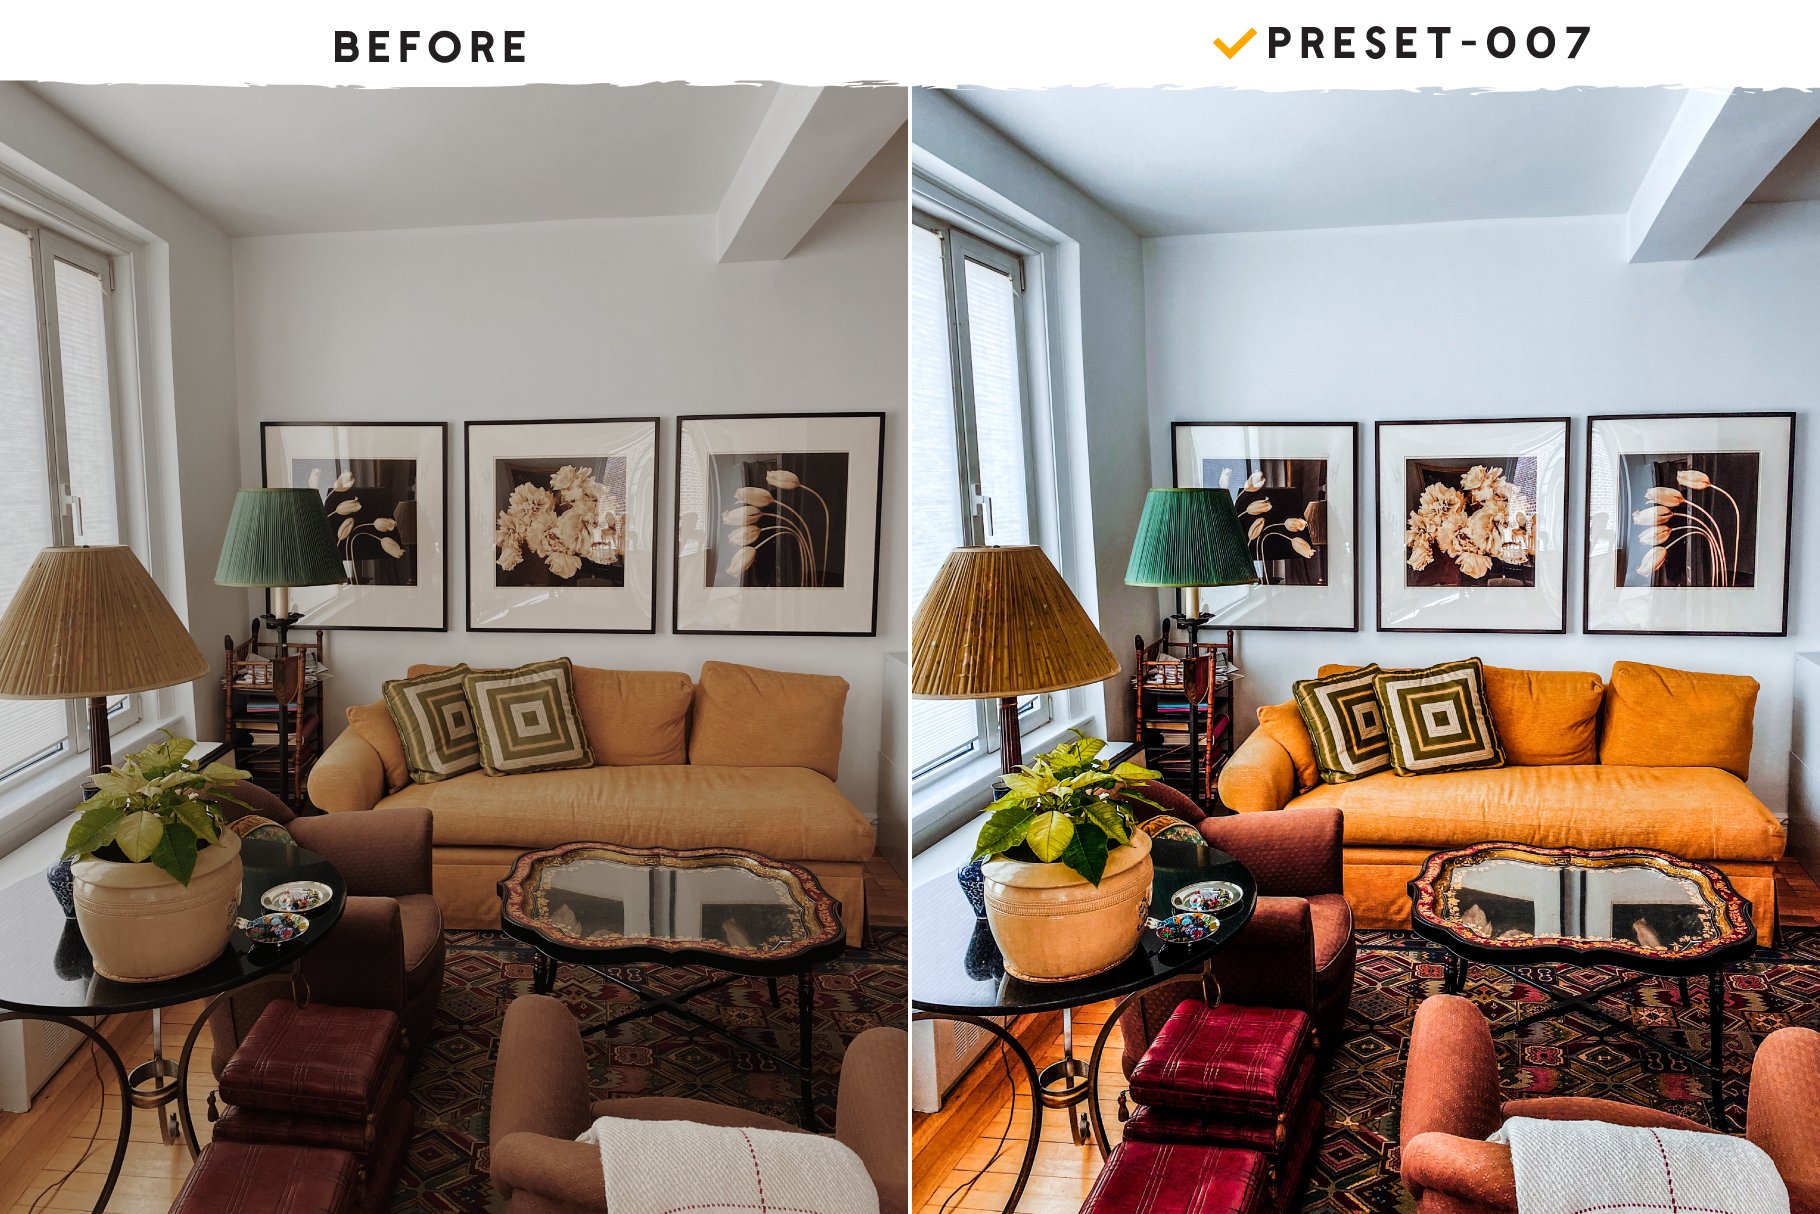 Room Decor Presets & Actionspreview image.